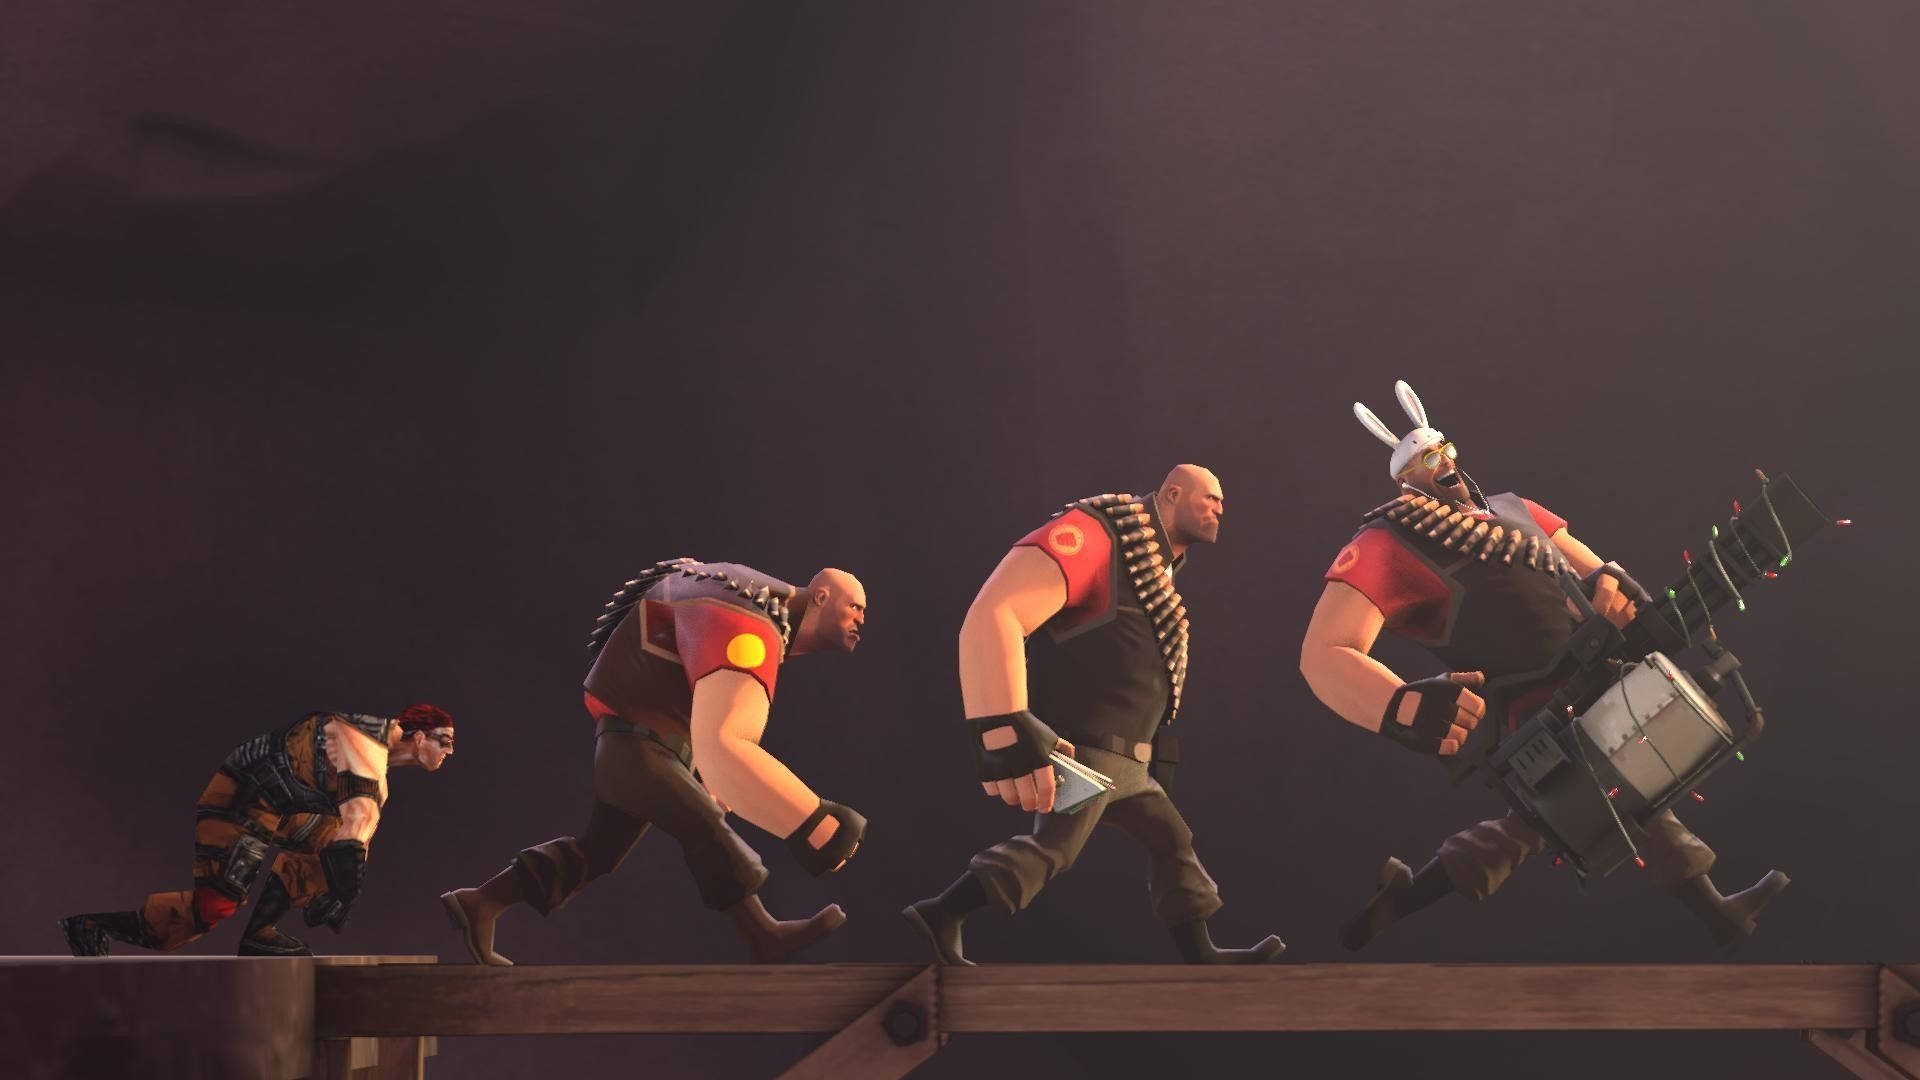 Tf2 1920X1080 Wallpaper and Background Image